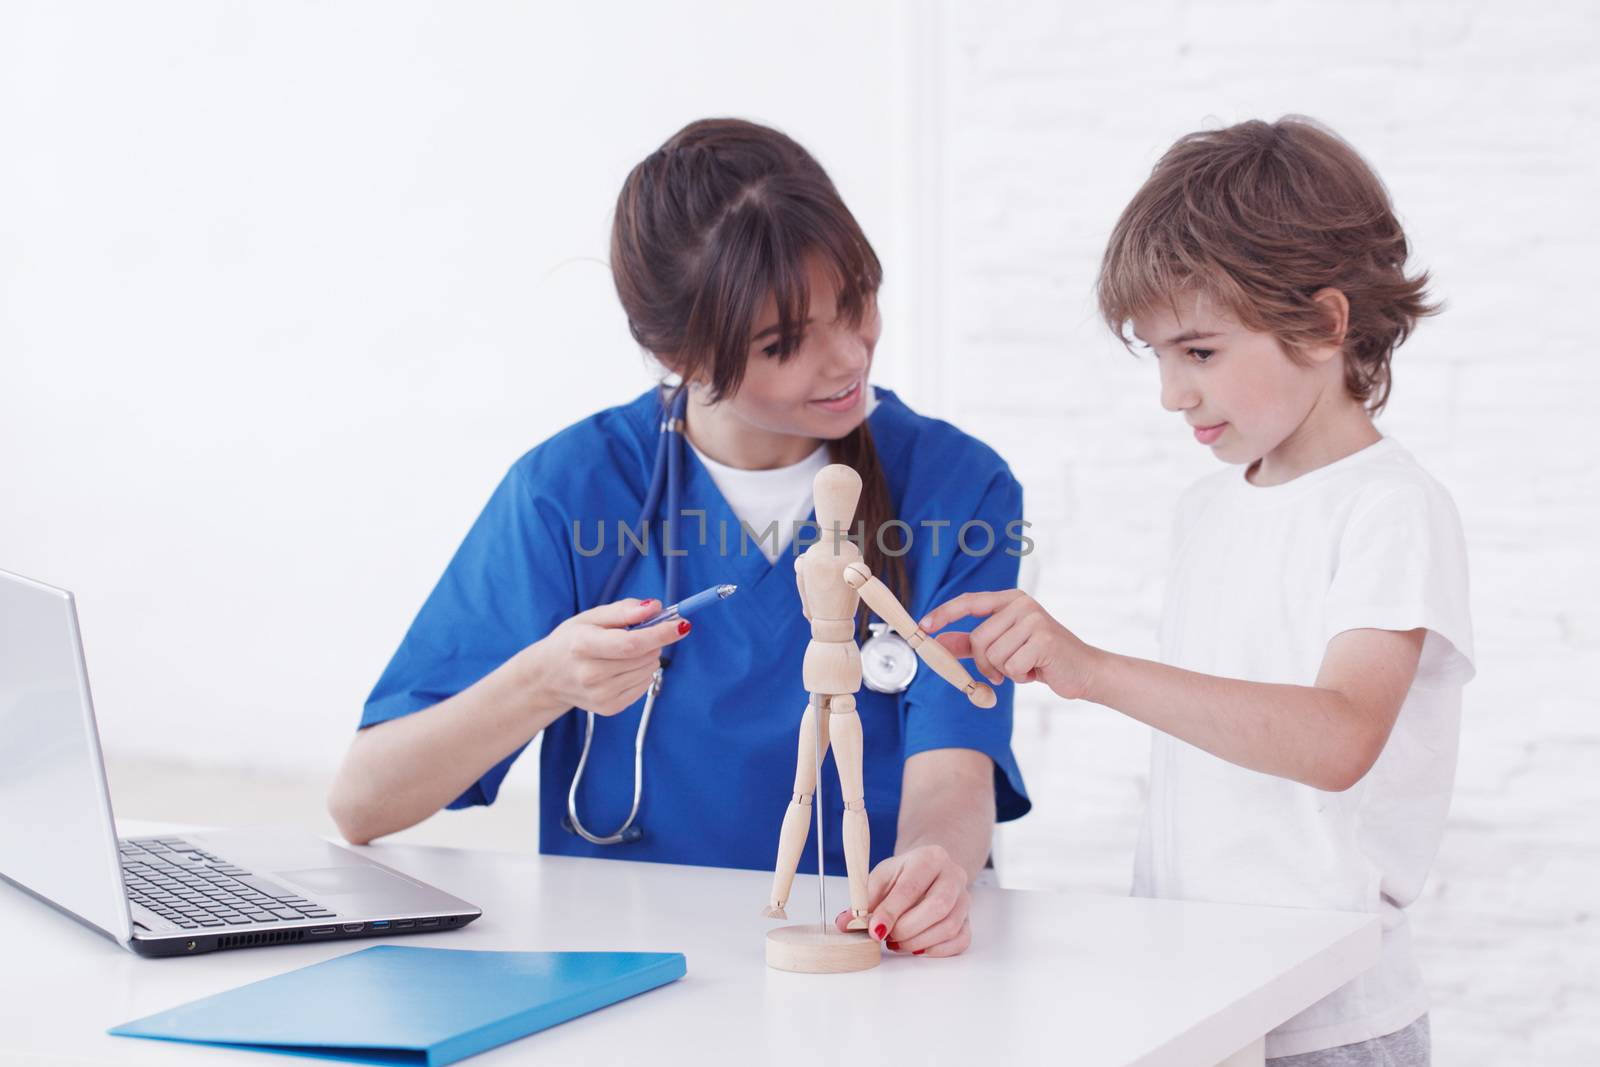 Doctor showing anatomical doll to her child patient in medical office